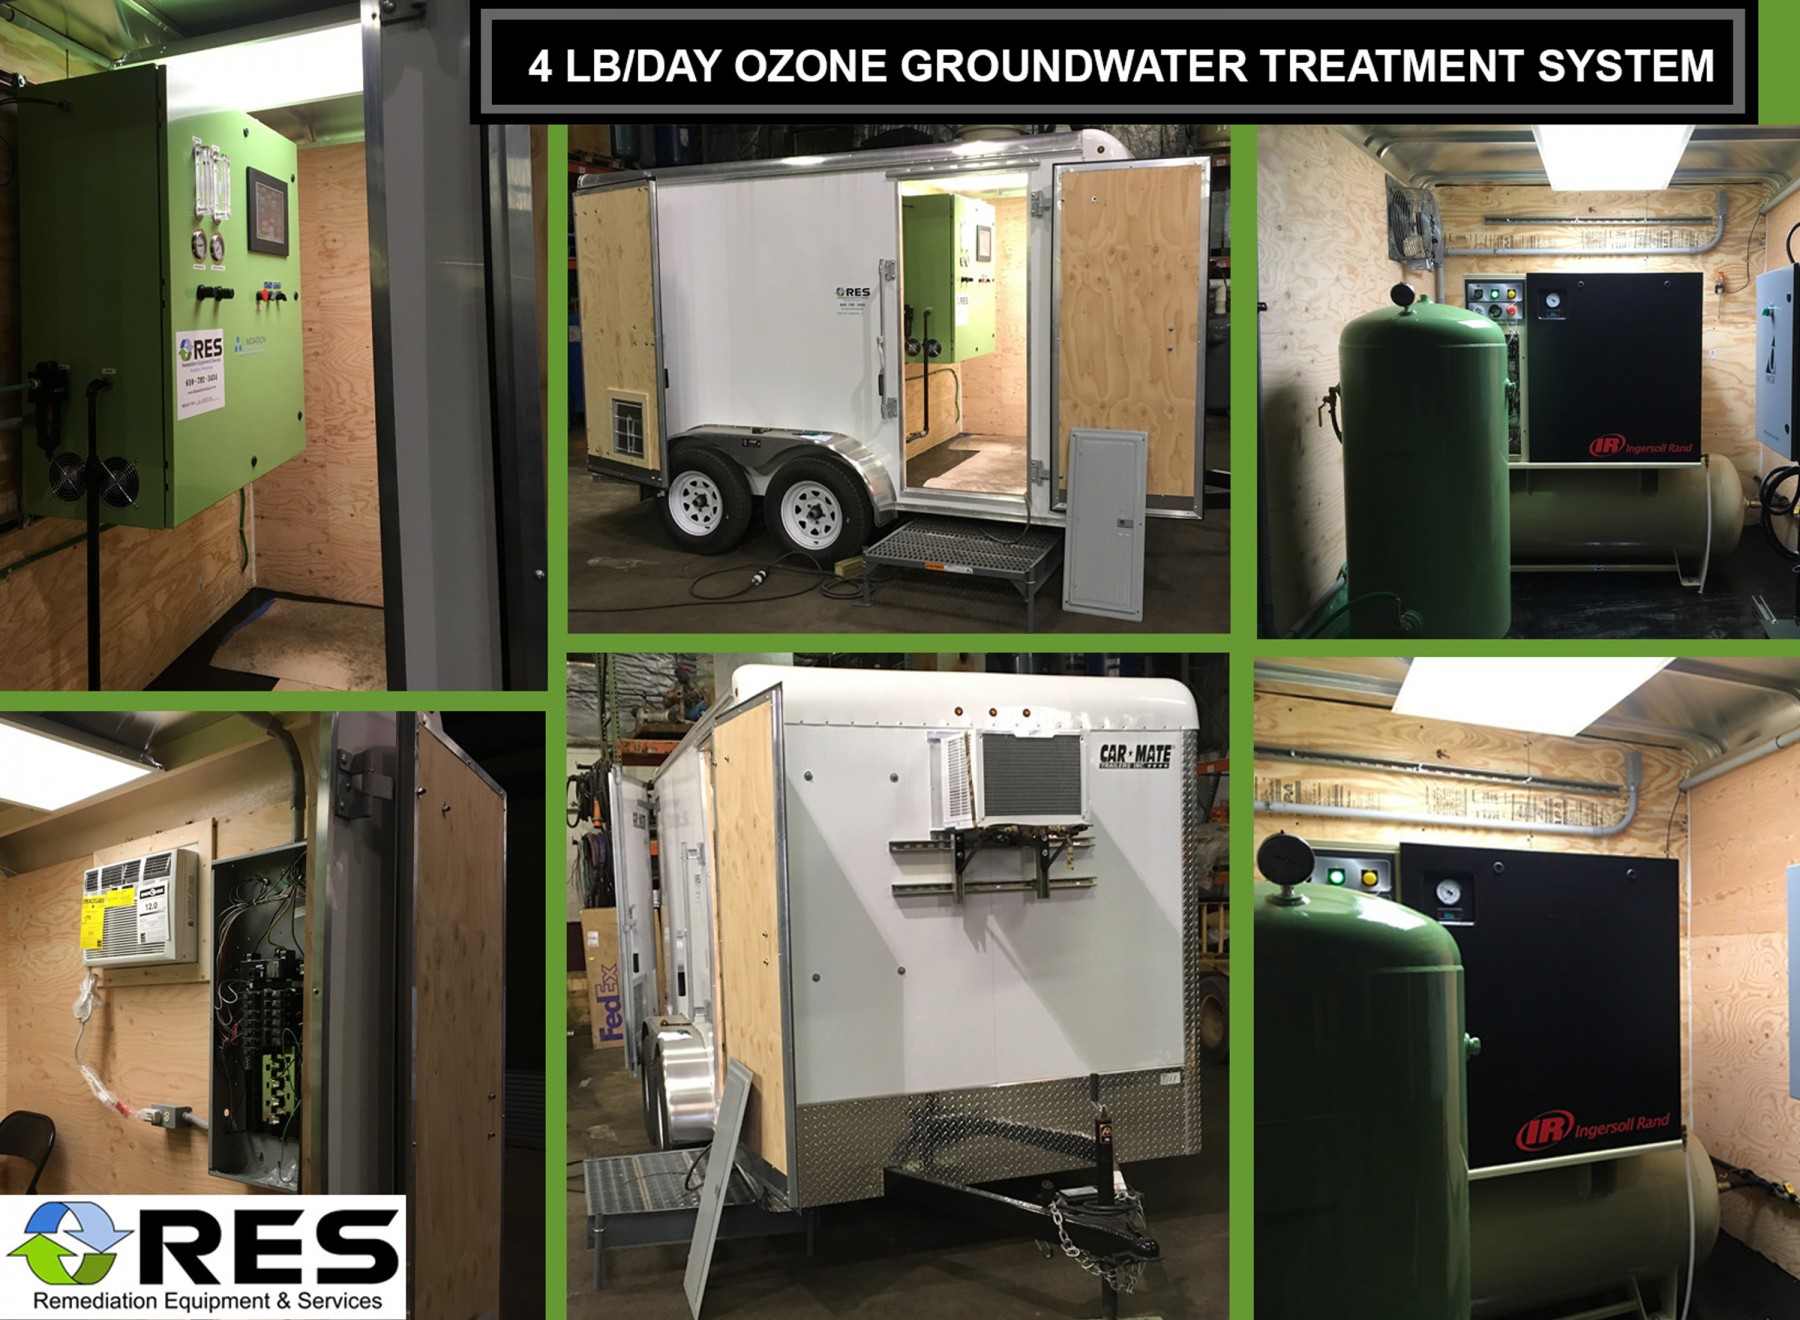 ORK-4 Ozone System installed in trailer by RES